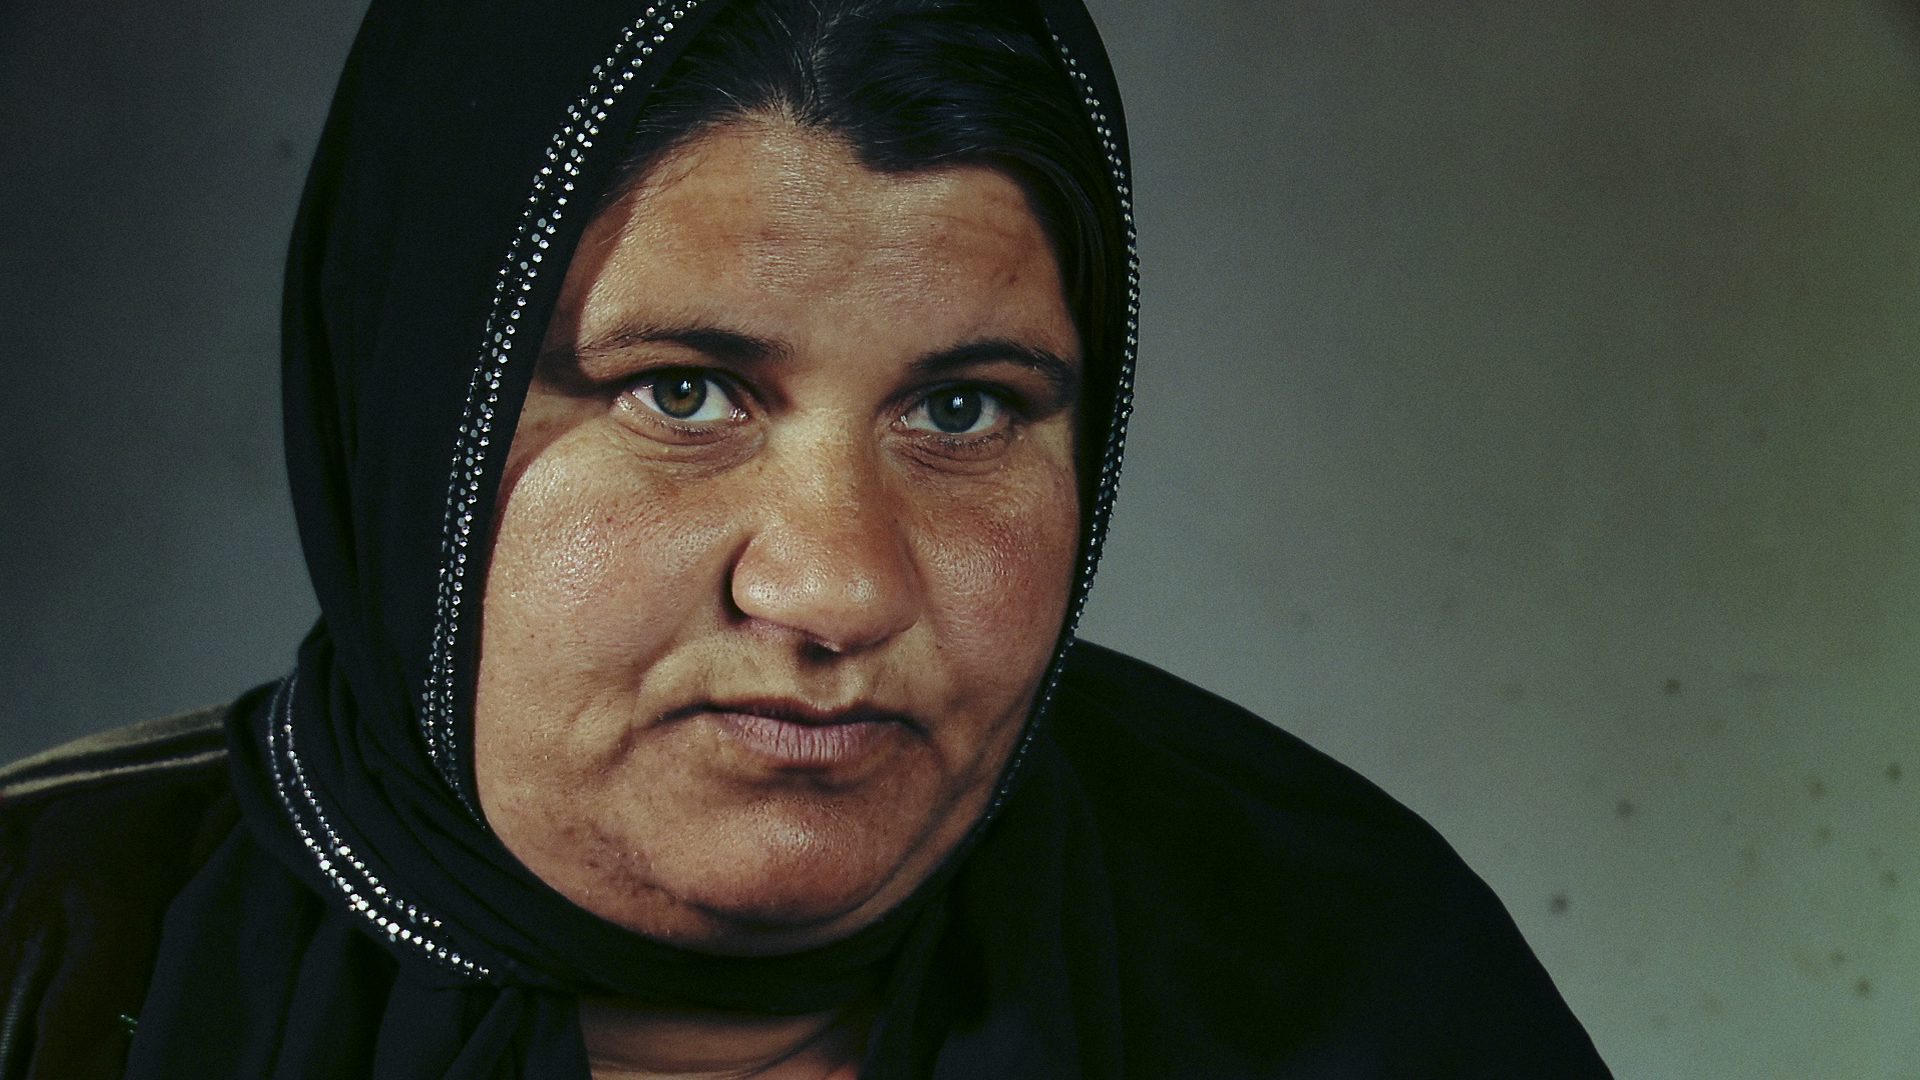 AISHA MAGHDID MAHMOUD witnessed the chemical bombing of Ware village in 1988. Panic-stricken villagers ran to the local spring to wash themselves and their children. However, the water was poisoned and 20 lost their lives. Unaware that Aisha, her brother and her mother had escaped, her father searched desperately for them in the village and never returned. 